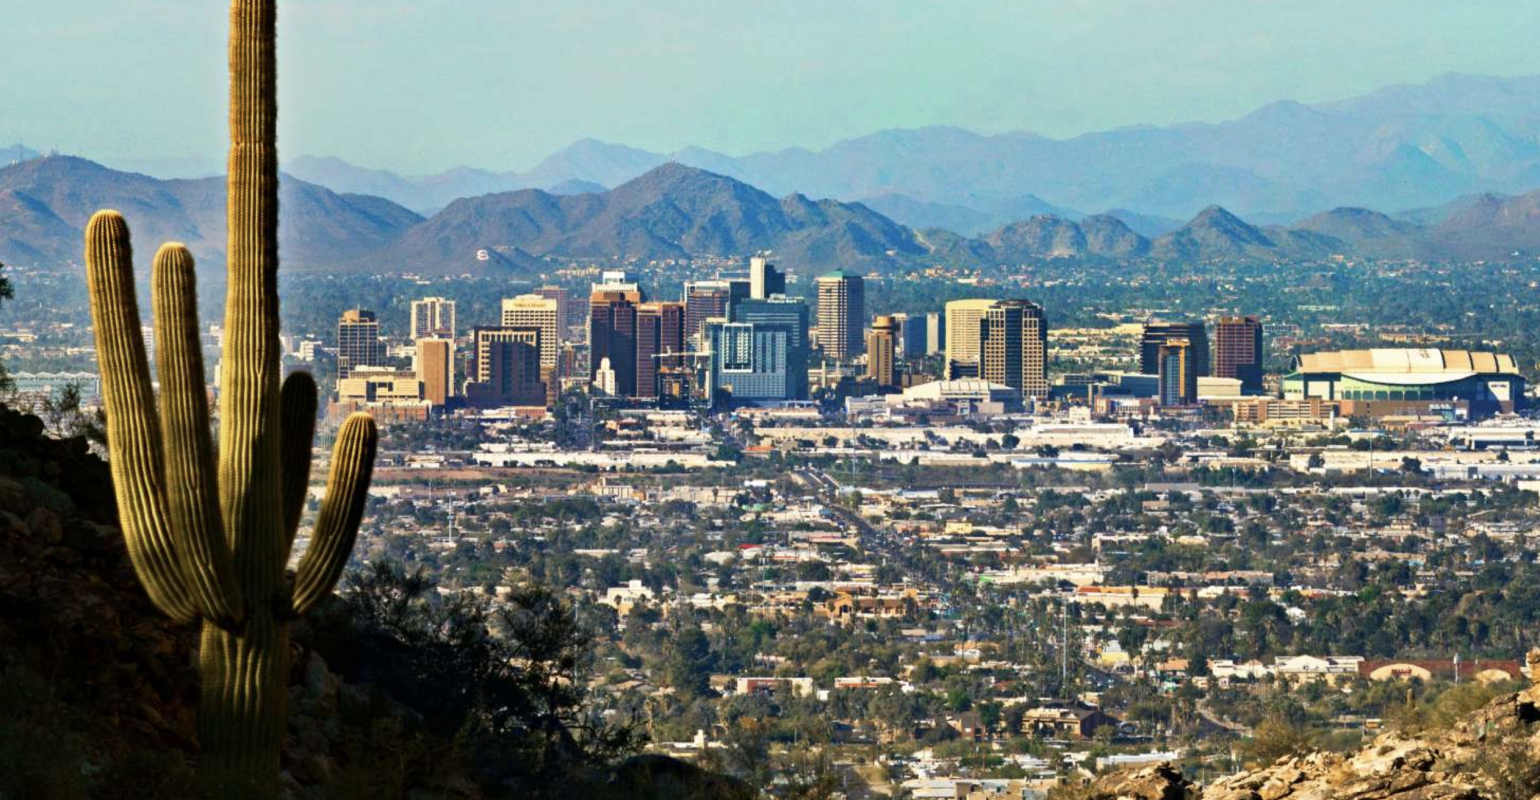 Phoenix, Arizona: A City in the Valley of the Sun